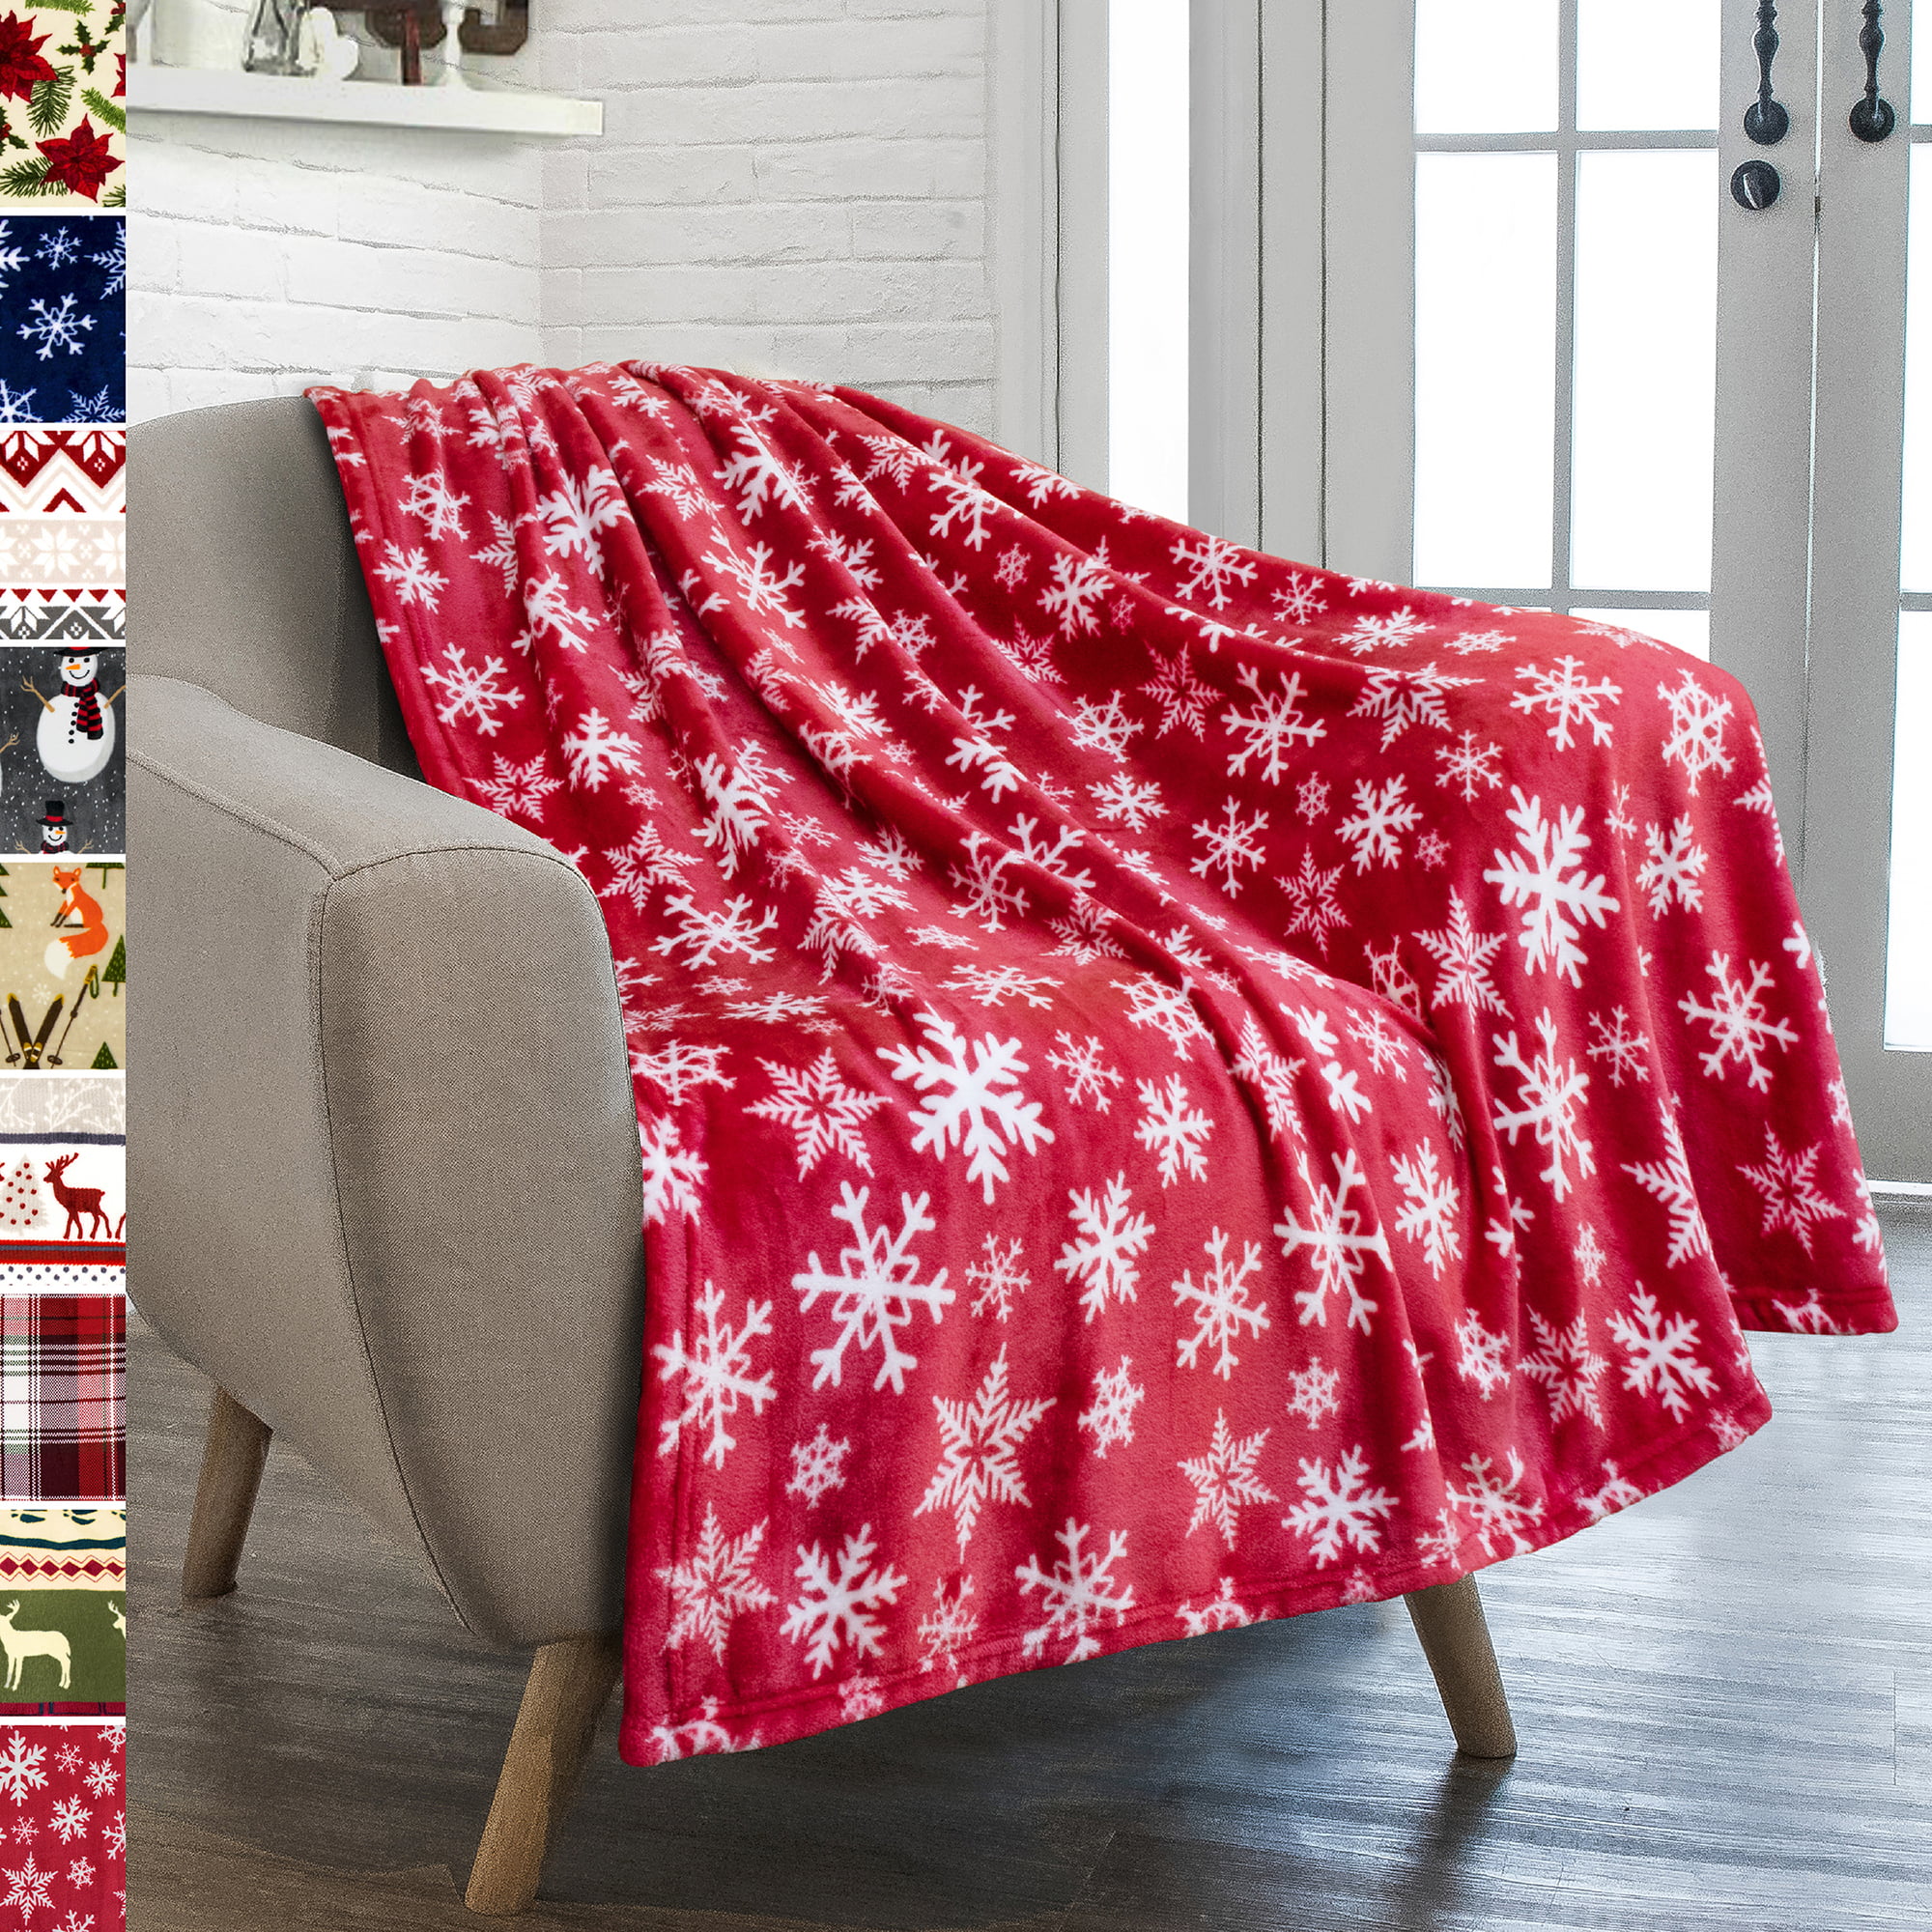 Christmas Snowflakes red， Design Light Thermal Blanket for Soft Premium Cotton Thermal Blankets（red） Christmas Throw Blanket Baby 40x50